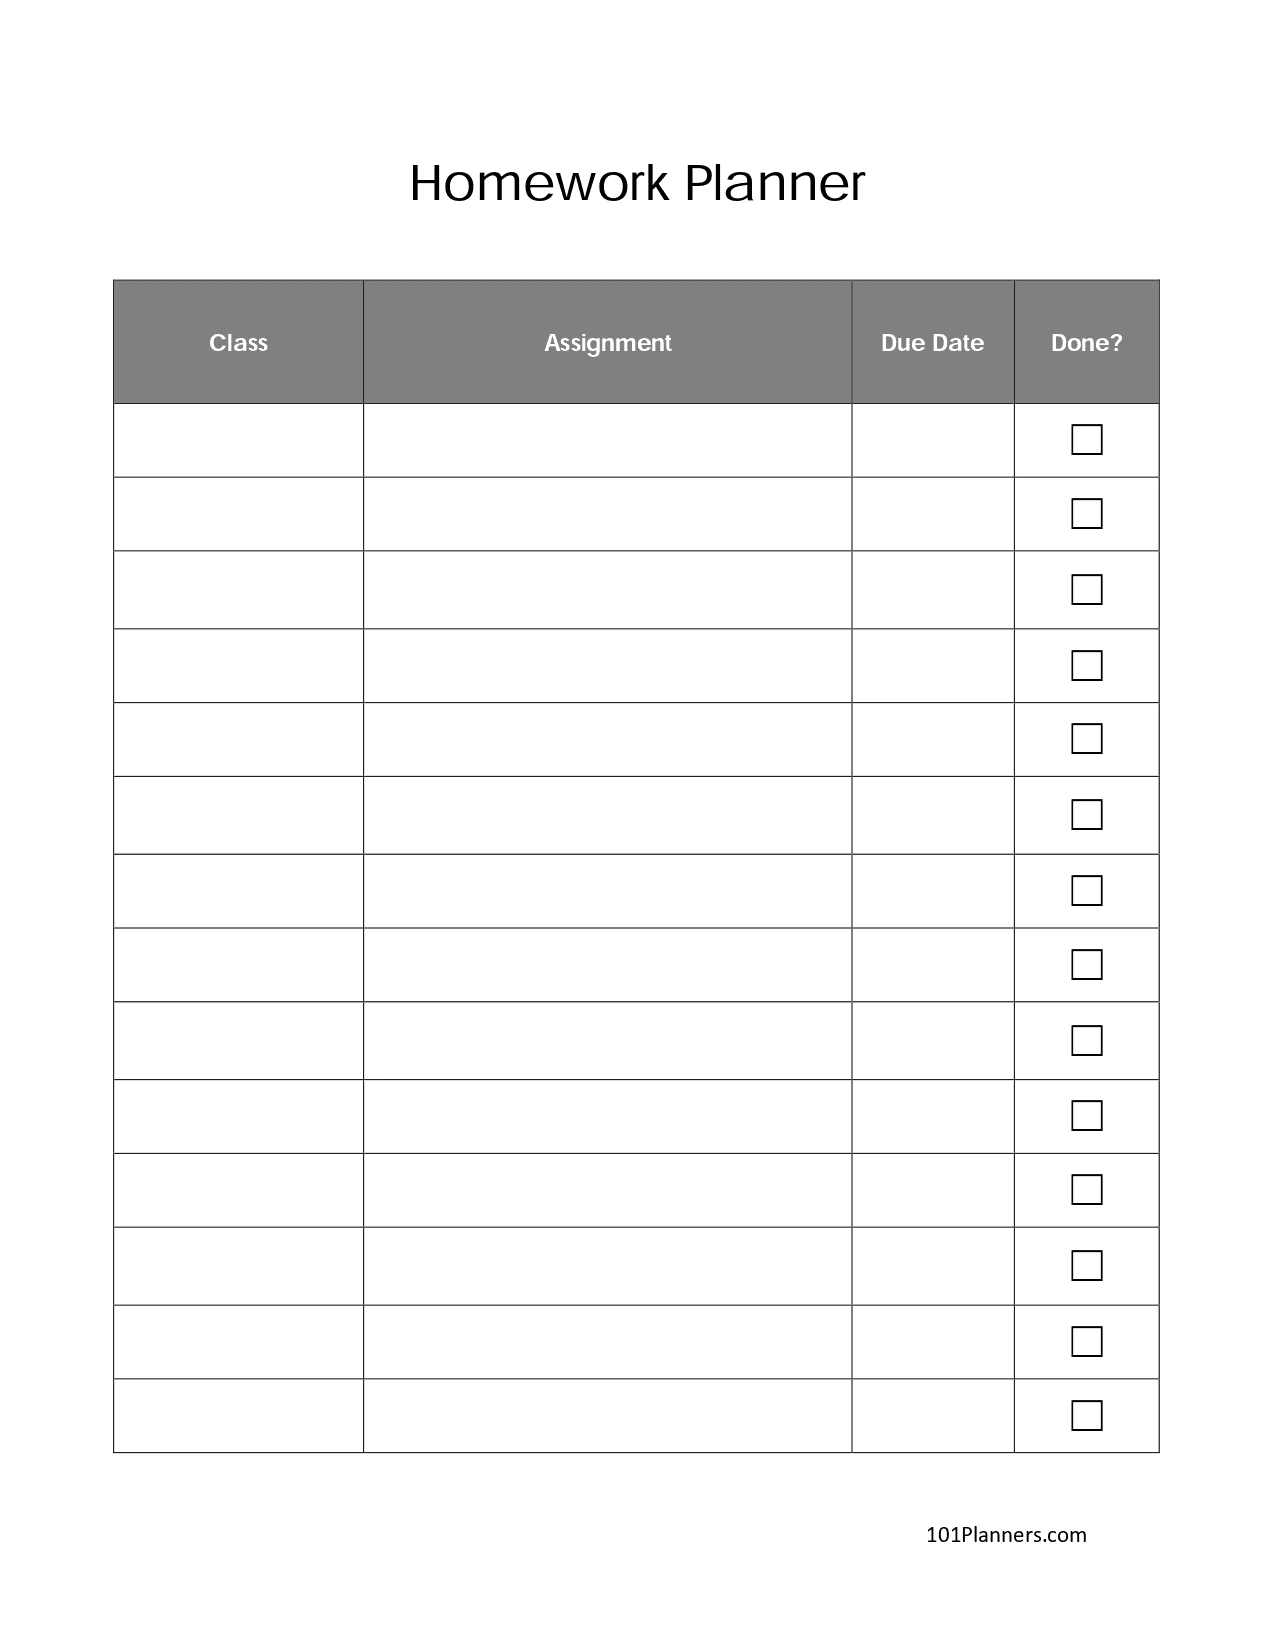 Free Printable Homework Planner Template | Pdf, Word, Excel Or Jpg throughout Free Printable Homework Assignment Sheets